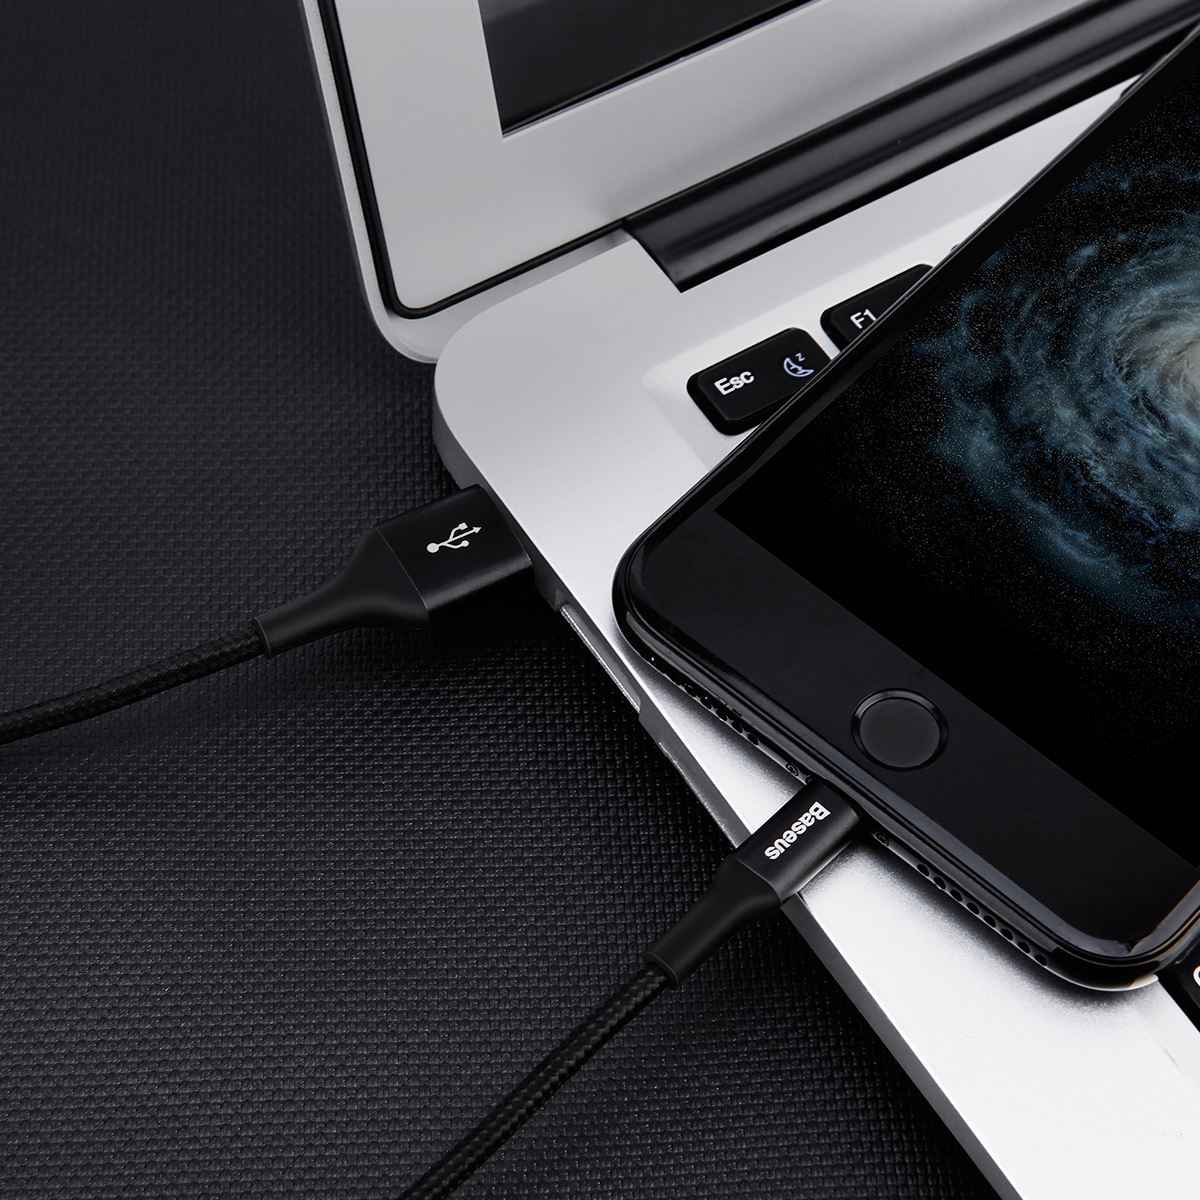 baseus apple mfi certified lightning 2.4a 1m buletproof kevlar rui series data sync and fast charging cable